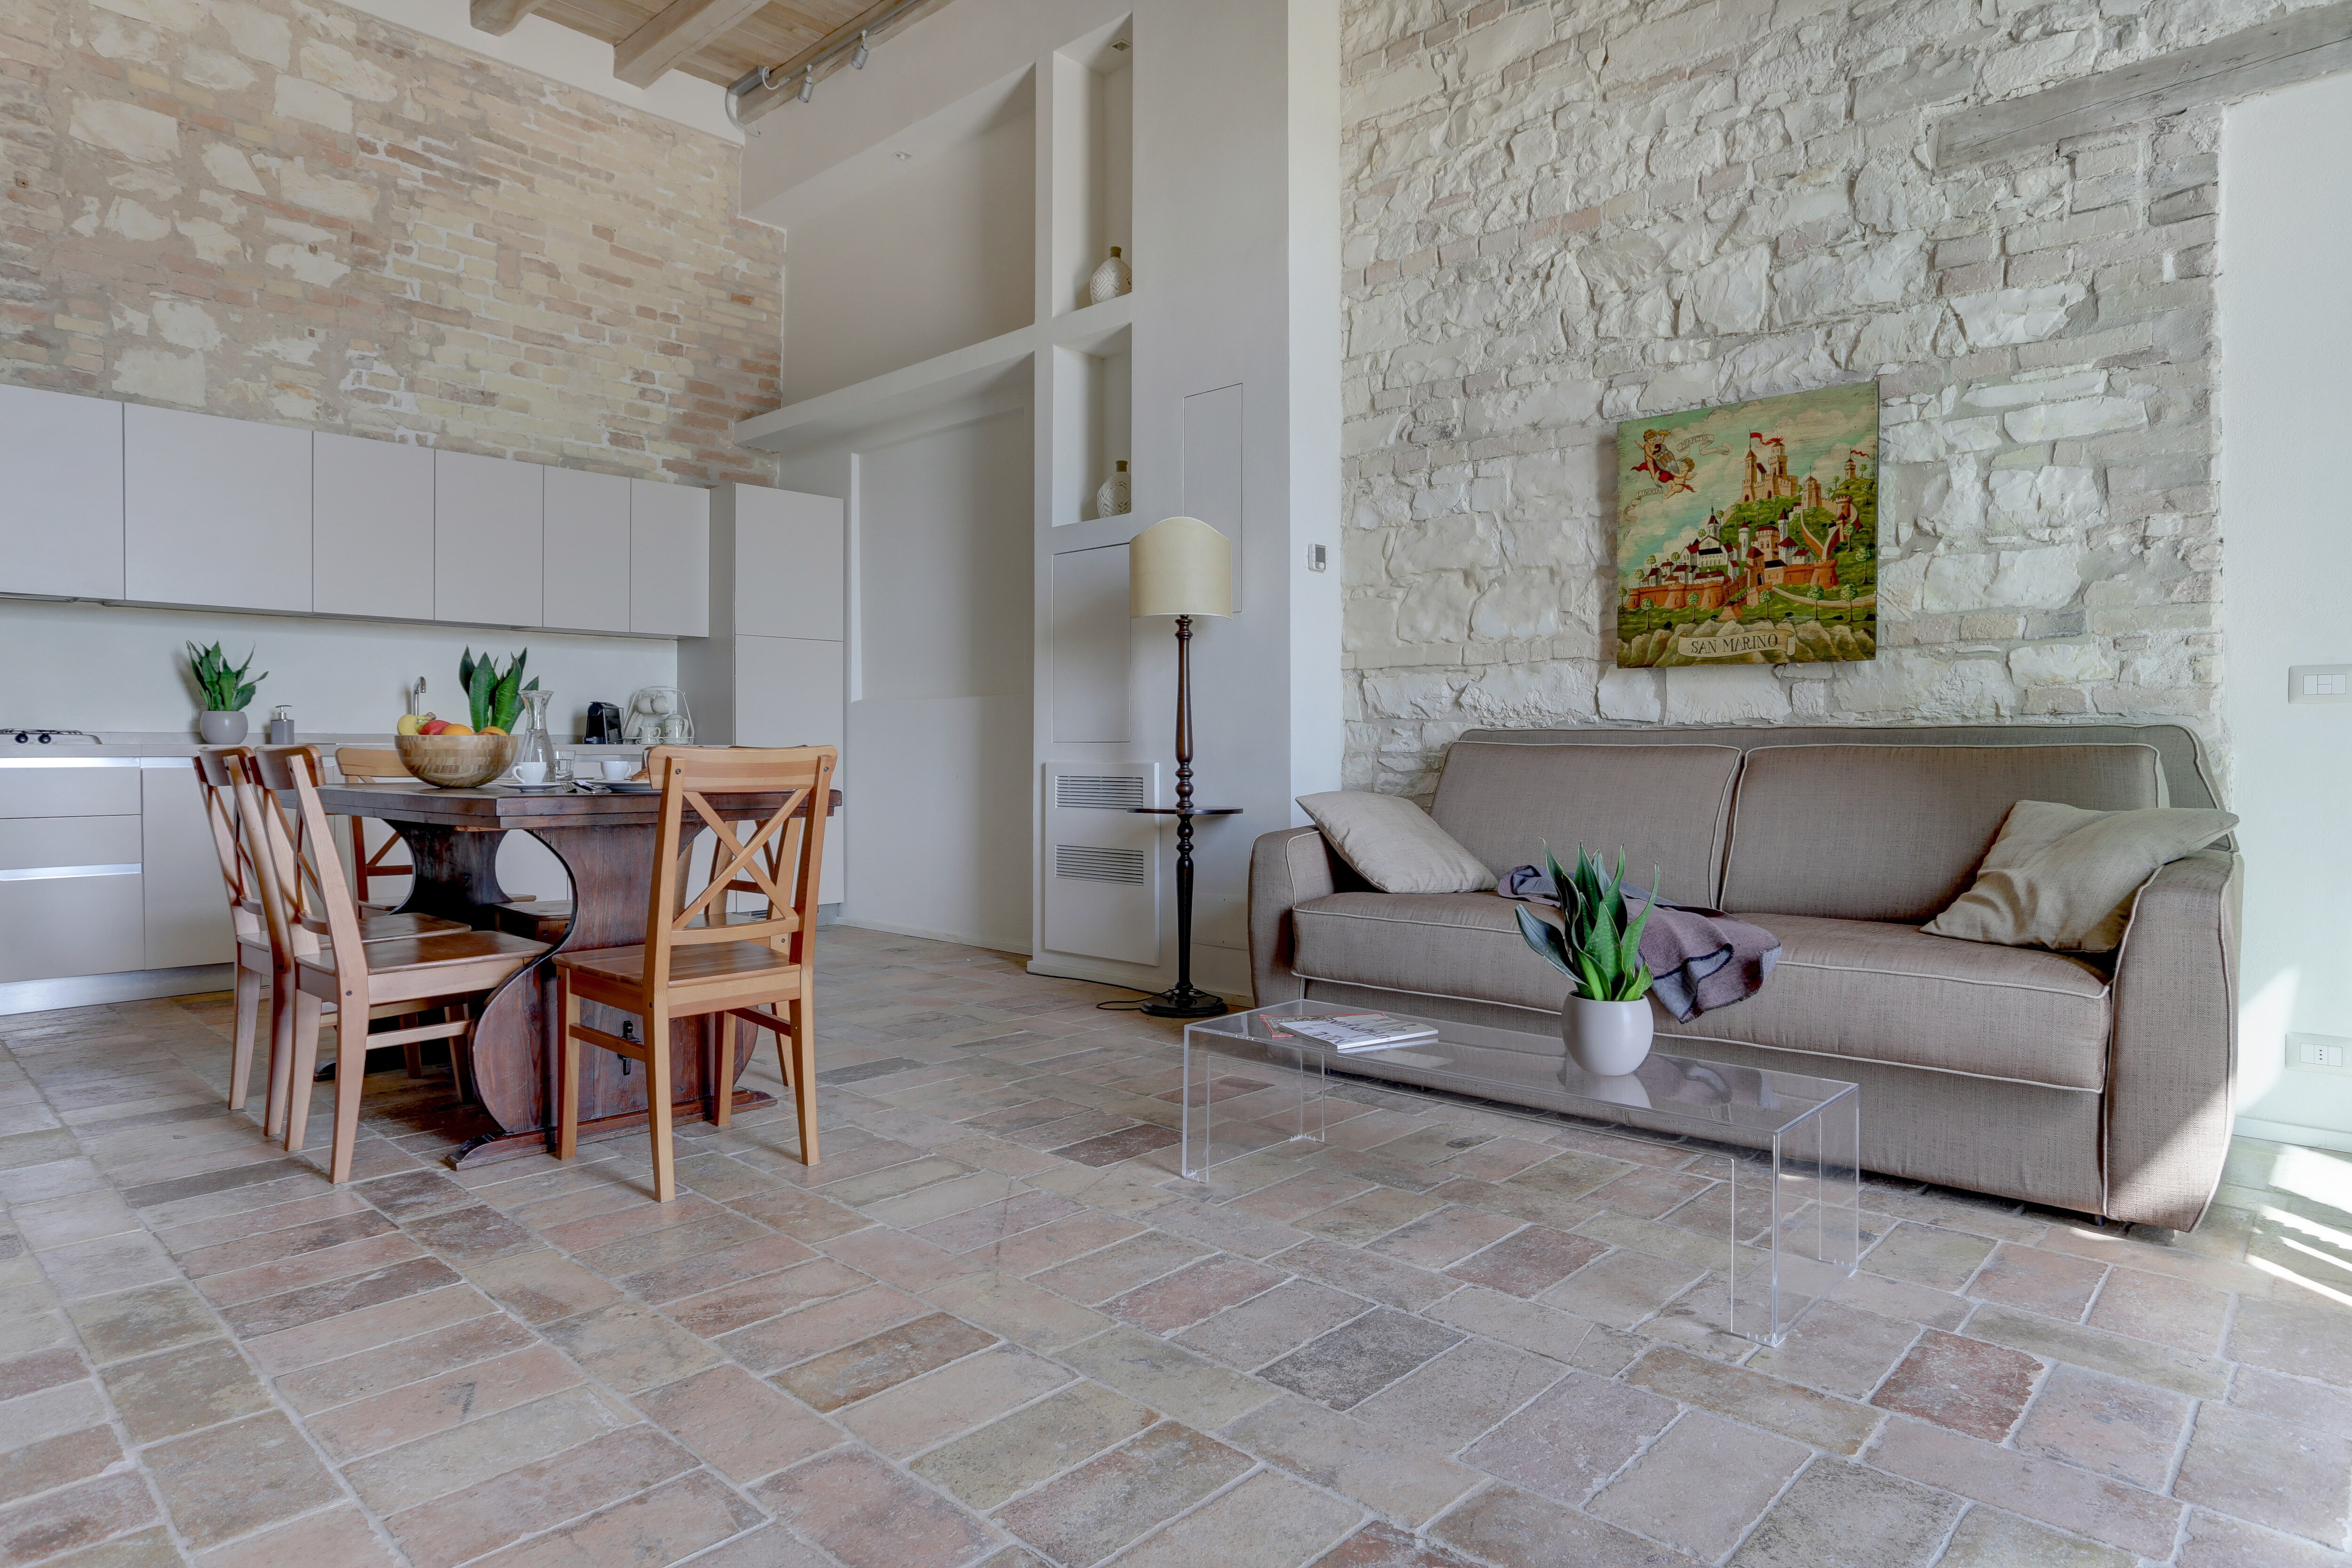 Property Image 1 - Remarkable Stone Apartment Filled with Natural Light